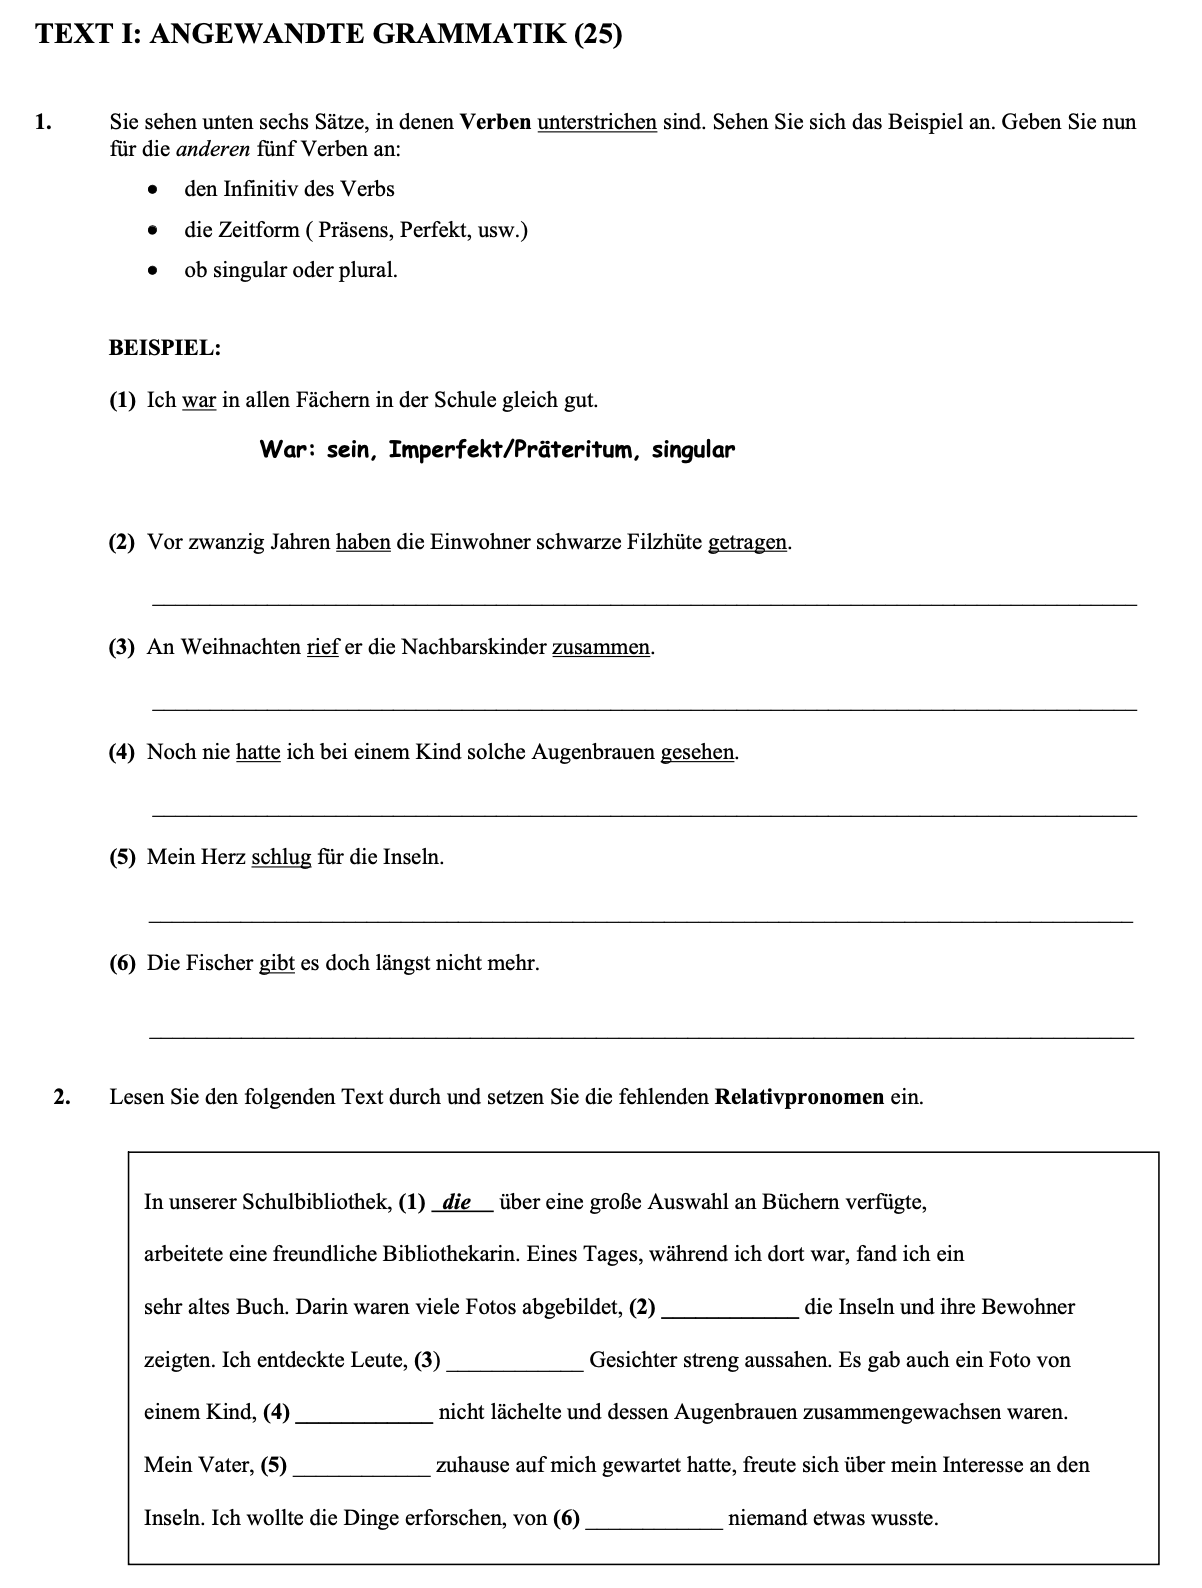 an image of the question 2009 Text I Angewandte Grammatik which is about the topic grammatik and the subject is Leaving Certificate german